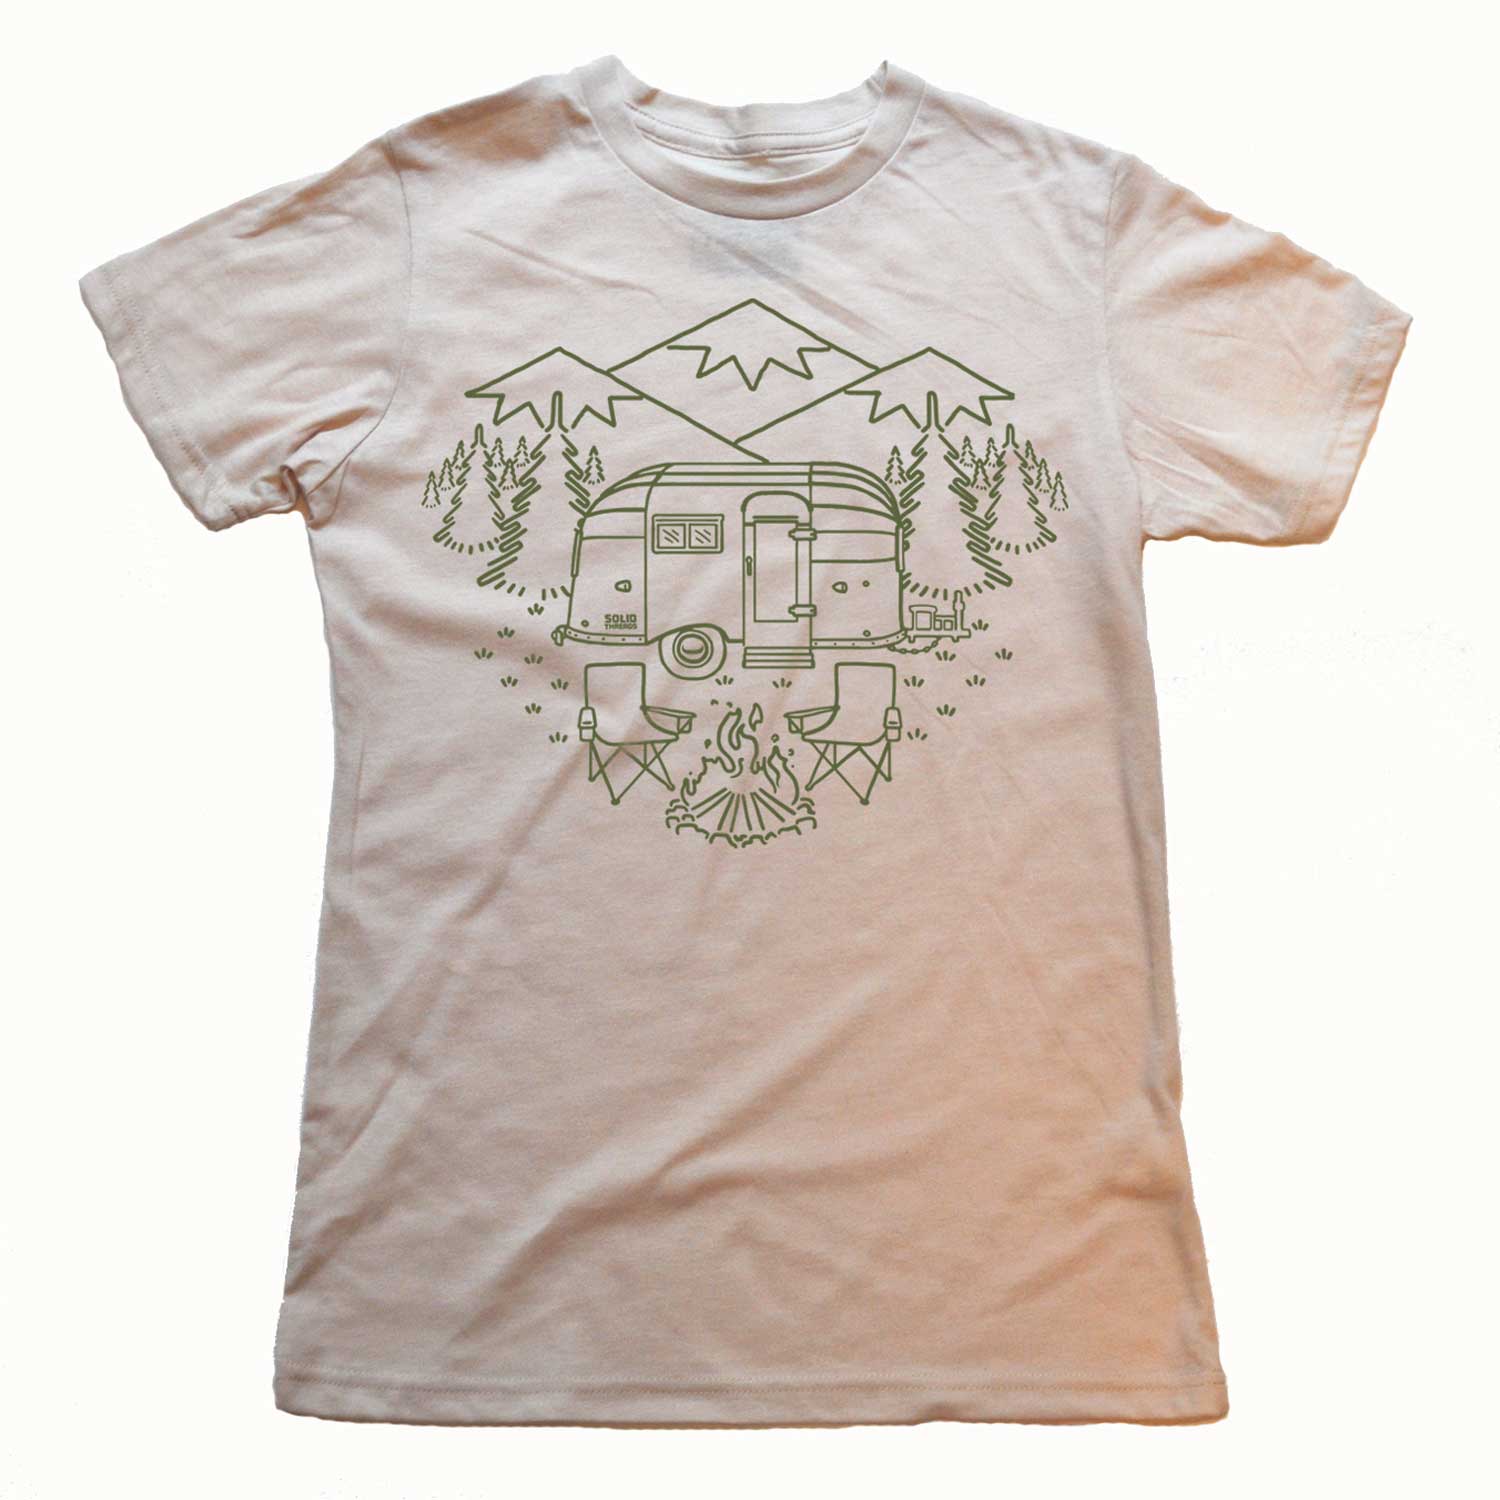 Women's Camp Site Vintage Graphic Crop Top | Retro Camping T-shirt | Solid Threads